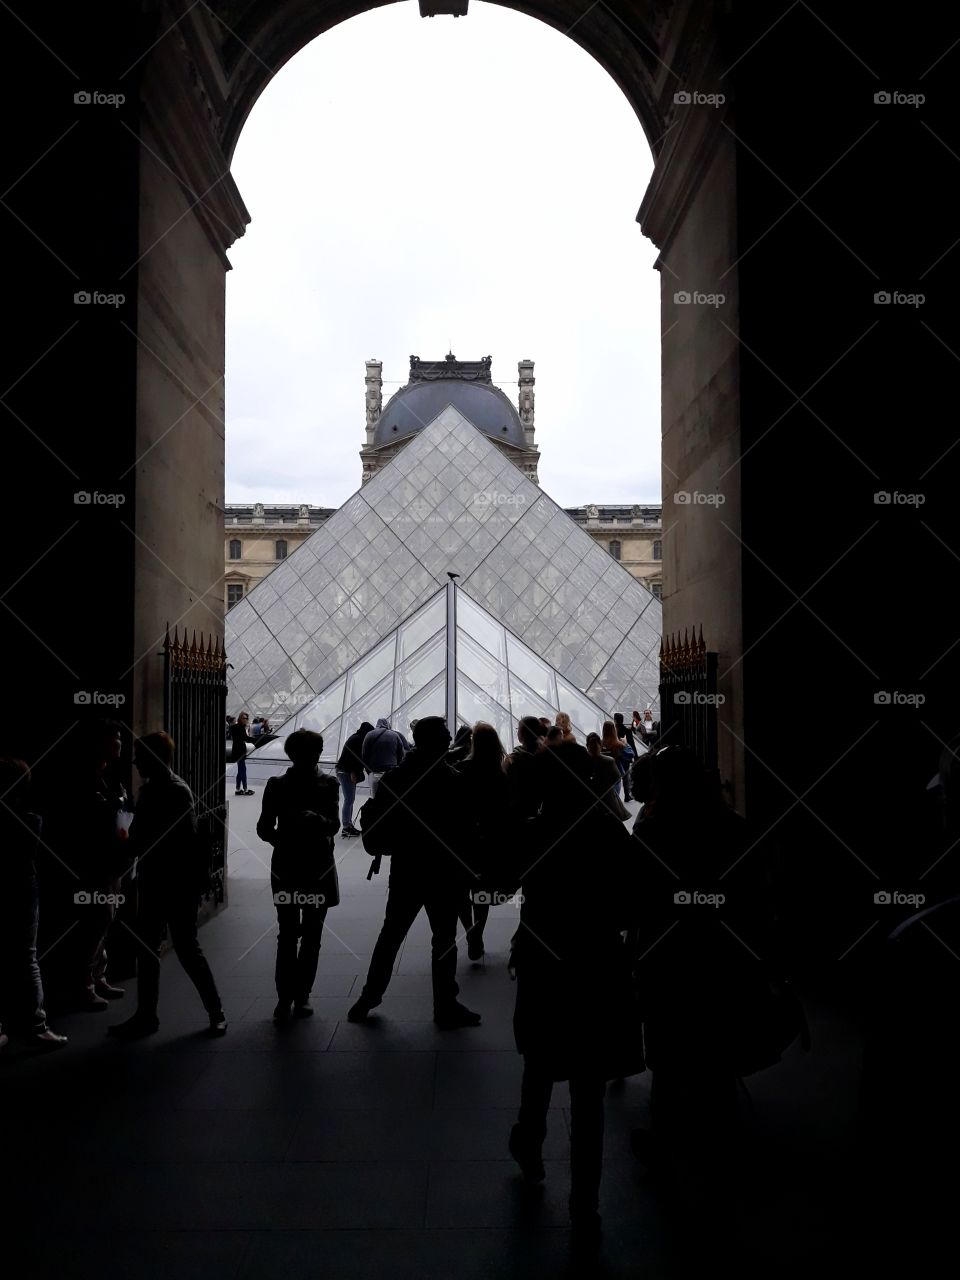 Entrance of the Louvre Museum in Paris.